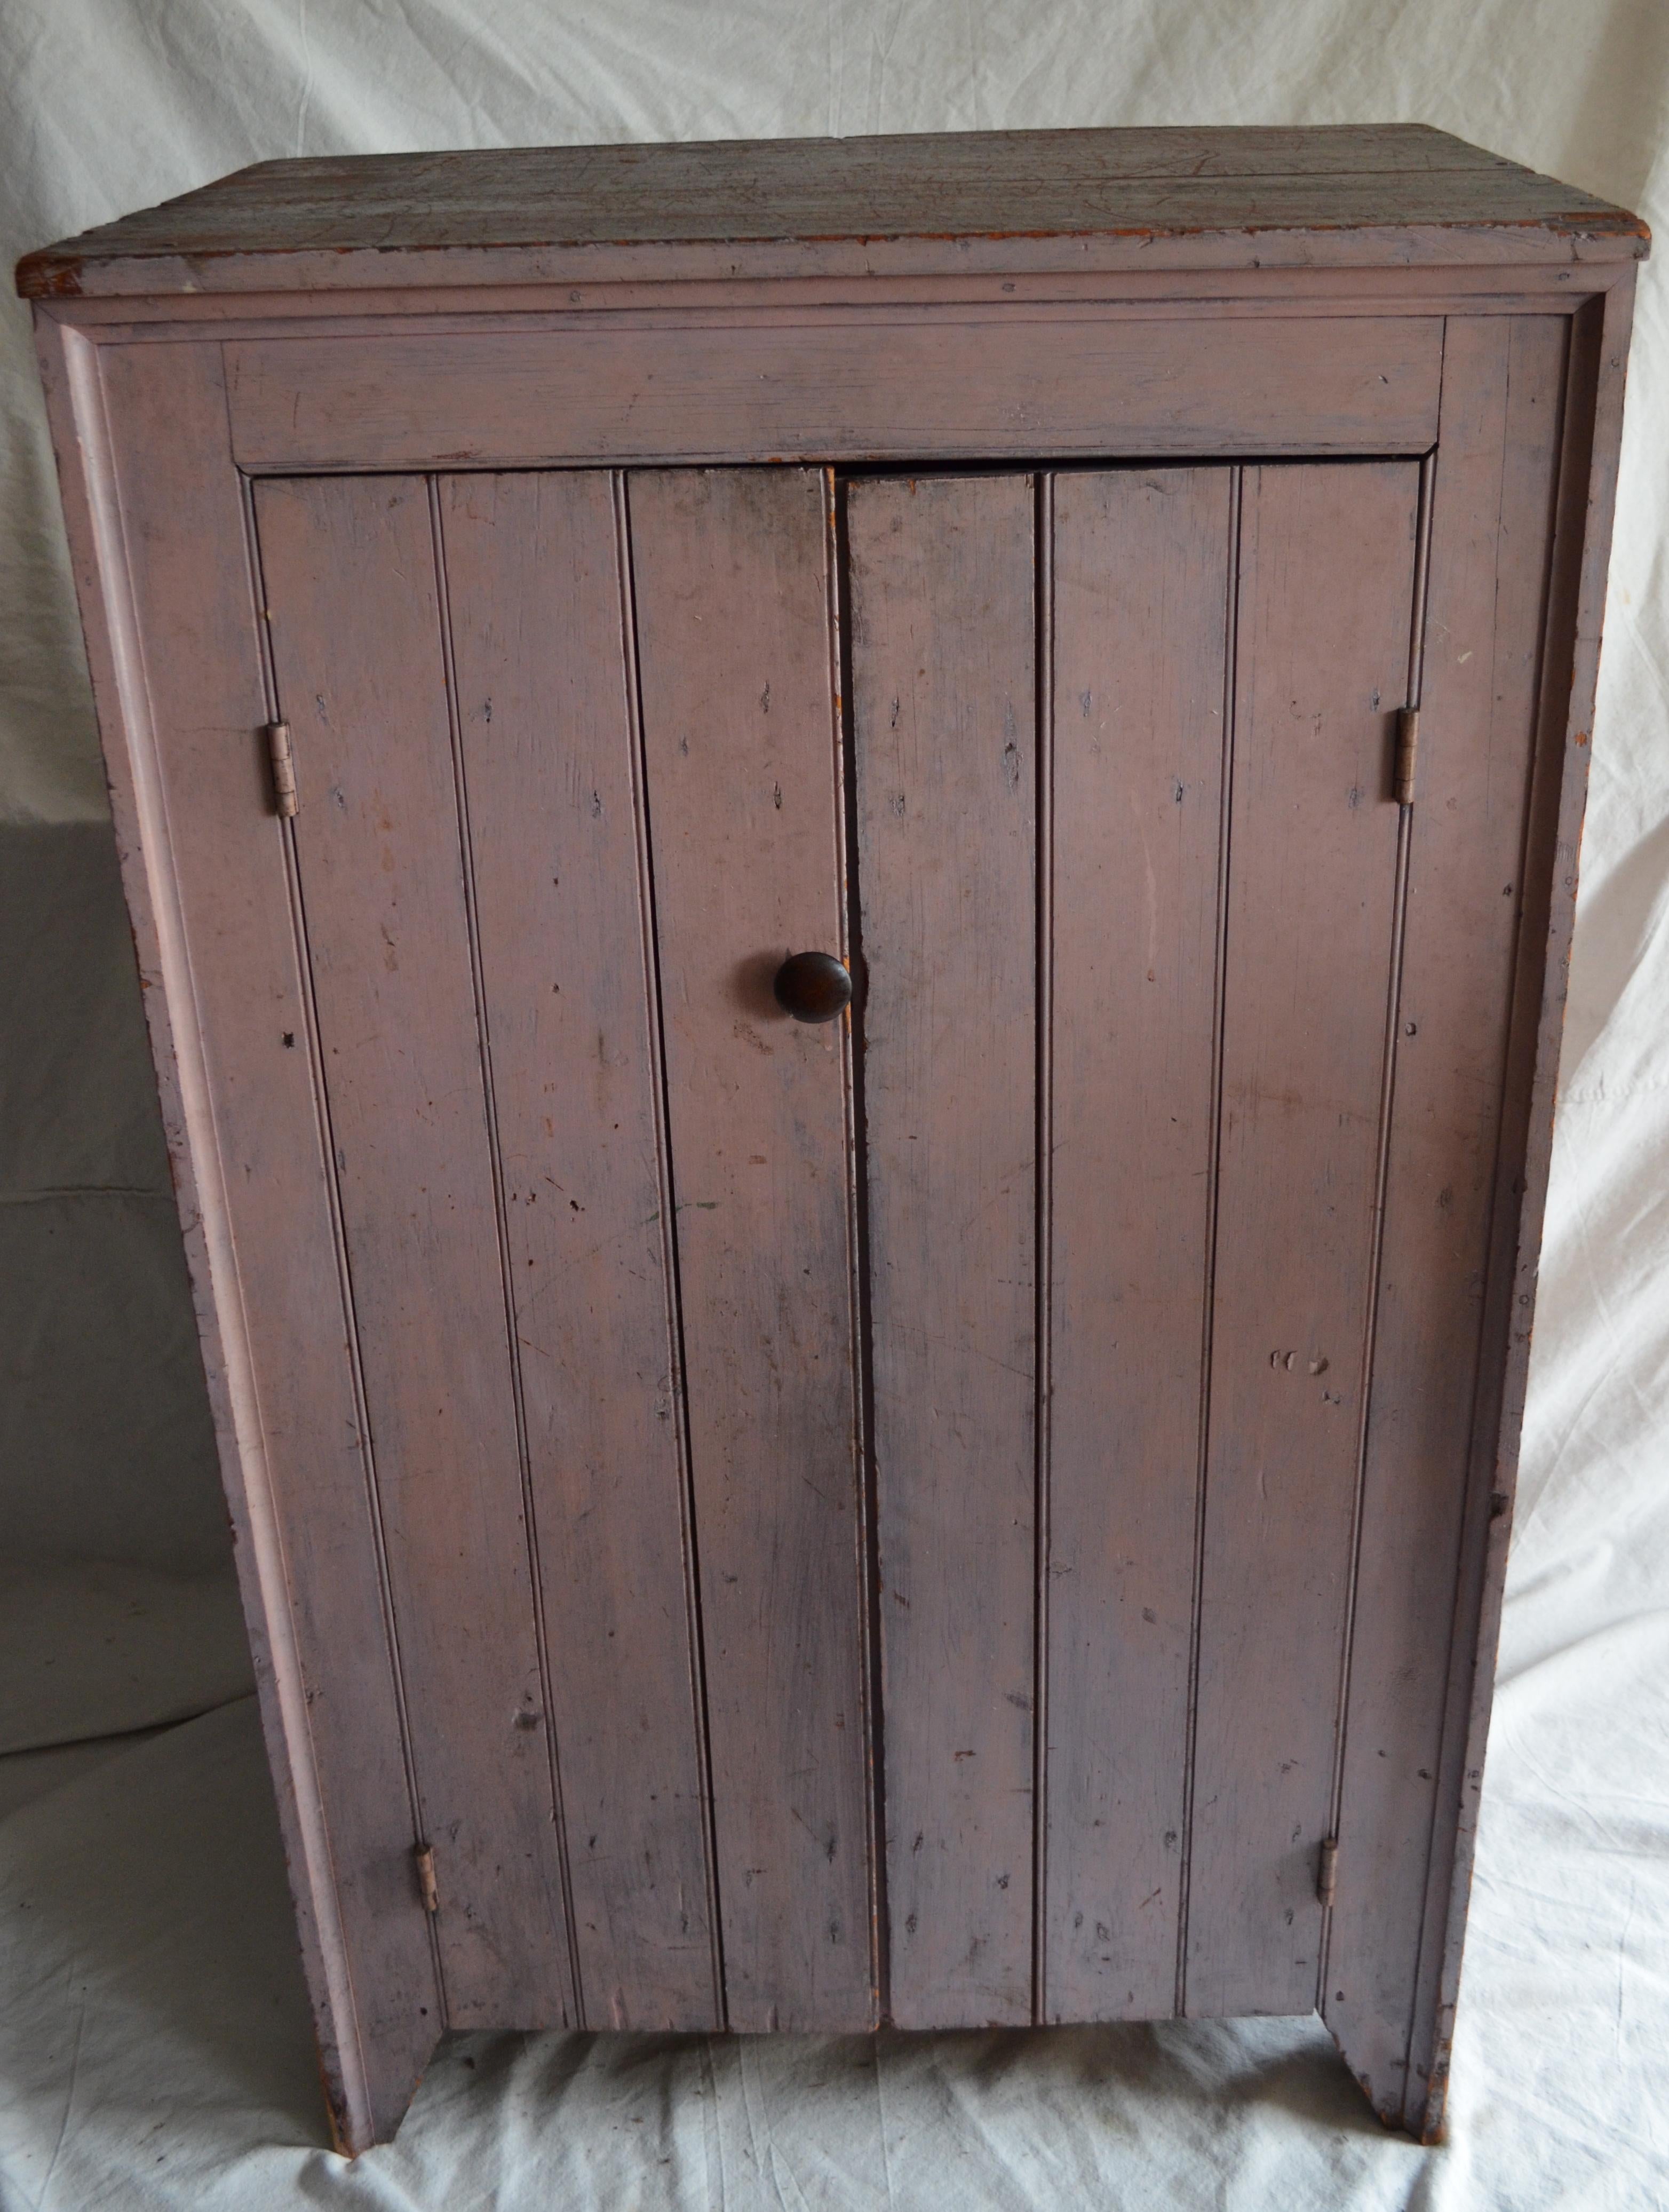 19th Century Early 1800s Cupboard for Parlor, Kitchen, Pantry with Lockbox Inside